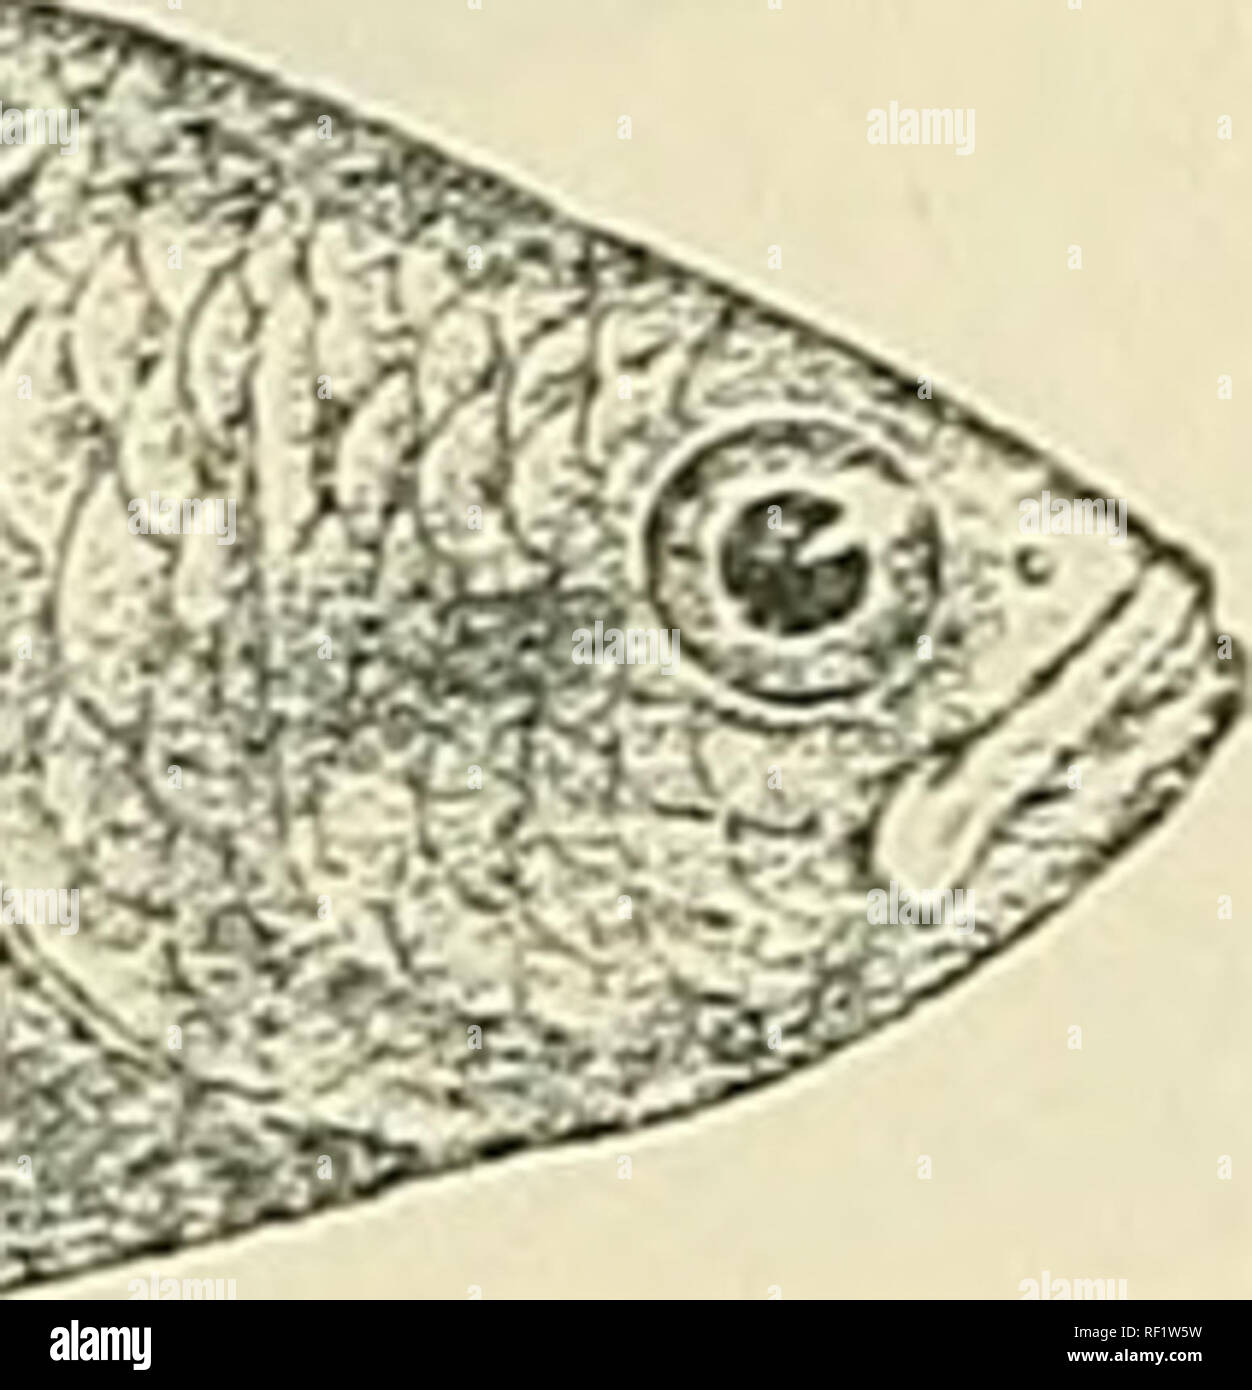 . Catalogue of the fresh-water fishes of Africa in the British Museum (Natural History). British Museum (Natural History); Fishes; Freshwater animals. Fig. 34. .'s.NJV*^5^. as^S^f^^ Anabas nanus. Type, after Giinther (I. c). 8. ANABAS NANUS. Ctenopoma nanwn, Gunth. Ann. &amp; Mag. N. H. (6) xvii. 189(3, p. 269, pi. xiii. fig. B. Anabas maarfatus (non Thomin.), Bouleng. Ann. Mus. Congo, Zoo], ii. p. 51 (1882); Steind. Denkschr. Ak. AVien, lxxxix. 1913, p. 50. Depth of body equal to length of head, 2| to 3 times in total length. Snout rounded, as long as or a little shorter than eye, which is 4  Stock Photo